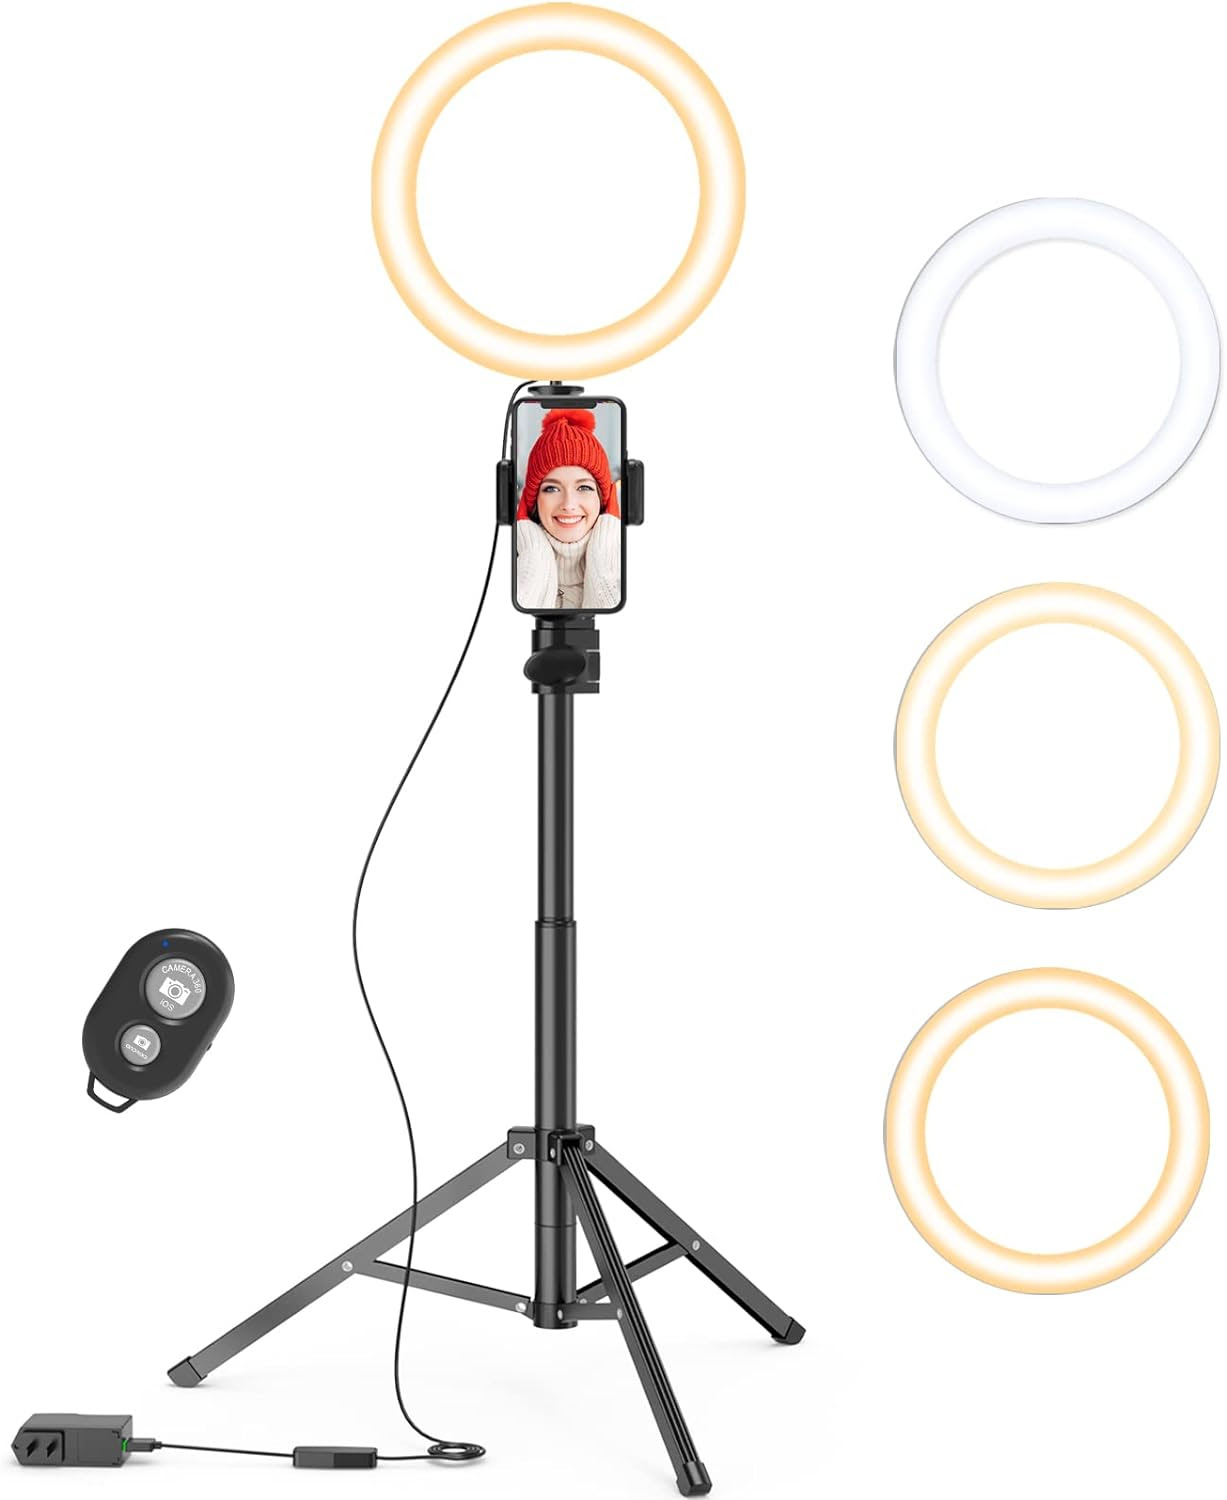 QIAYA Ring Light with Stand and Phone Holder. 3000 units. EXW Los Angeles $8.95 unit.